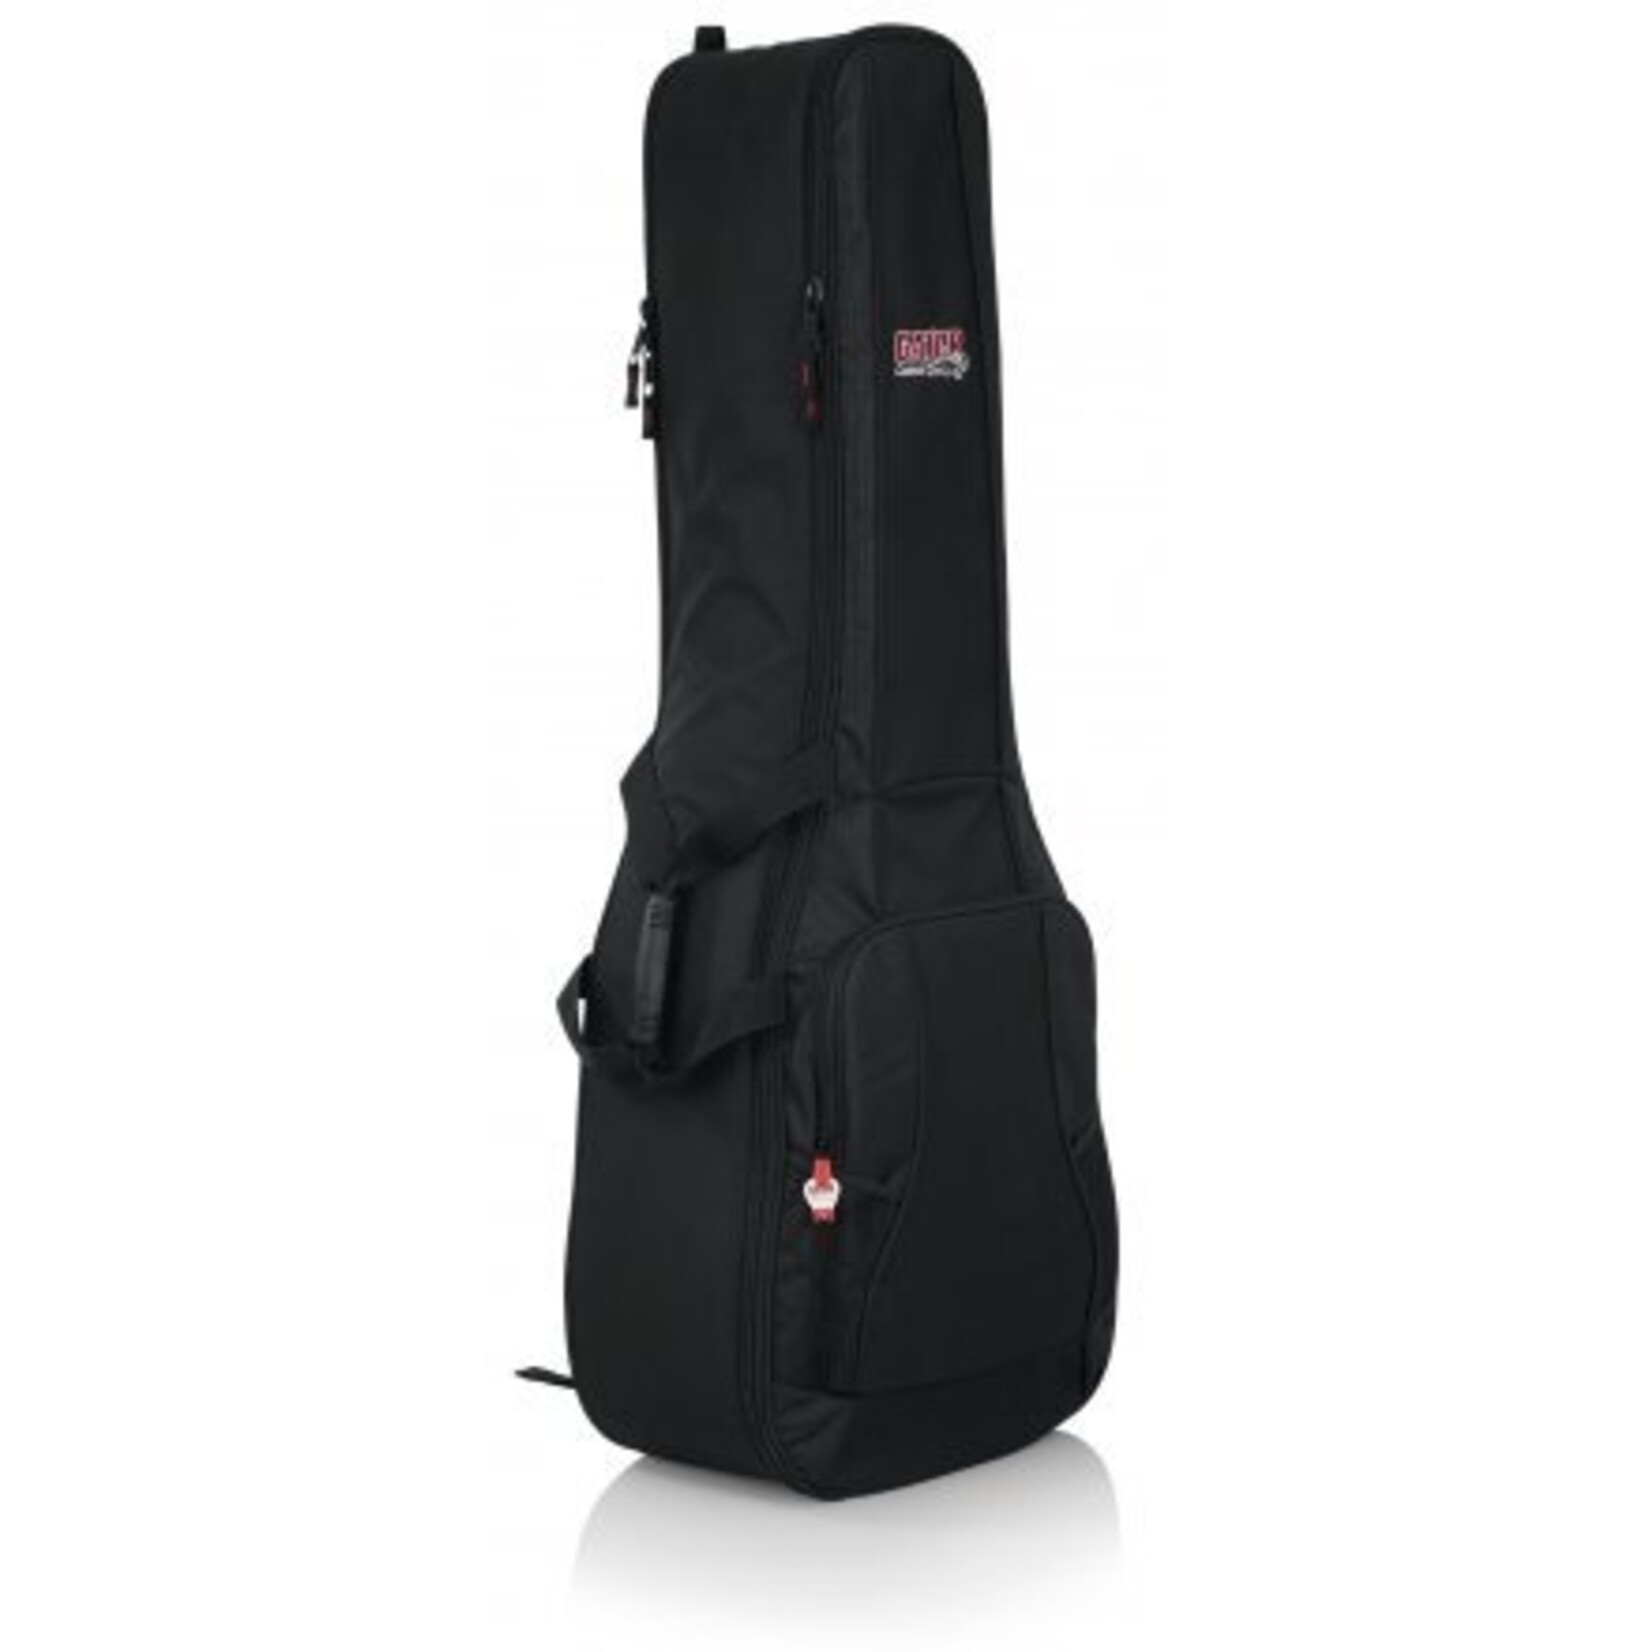 Gator 4G Series Double Guitar Bag For Acoustic And Electric Guitar With Adjustable Backpack Straps